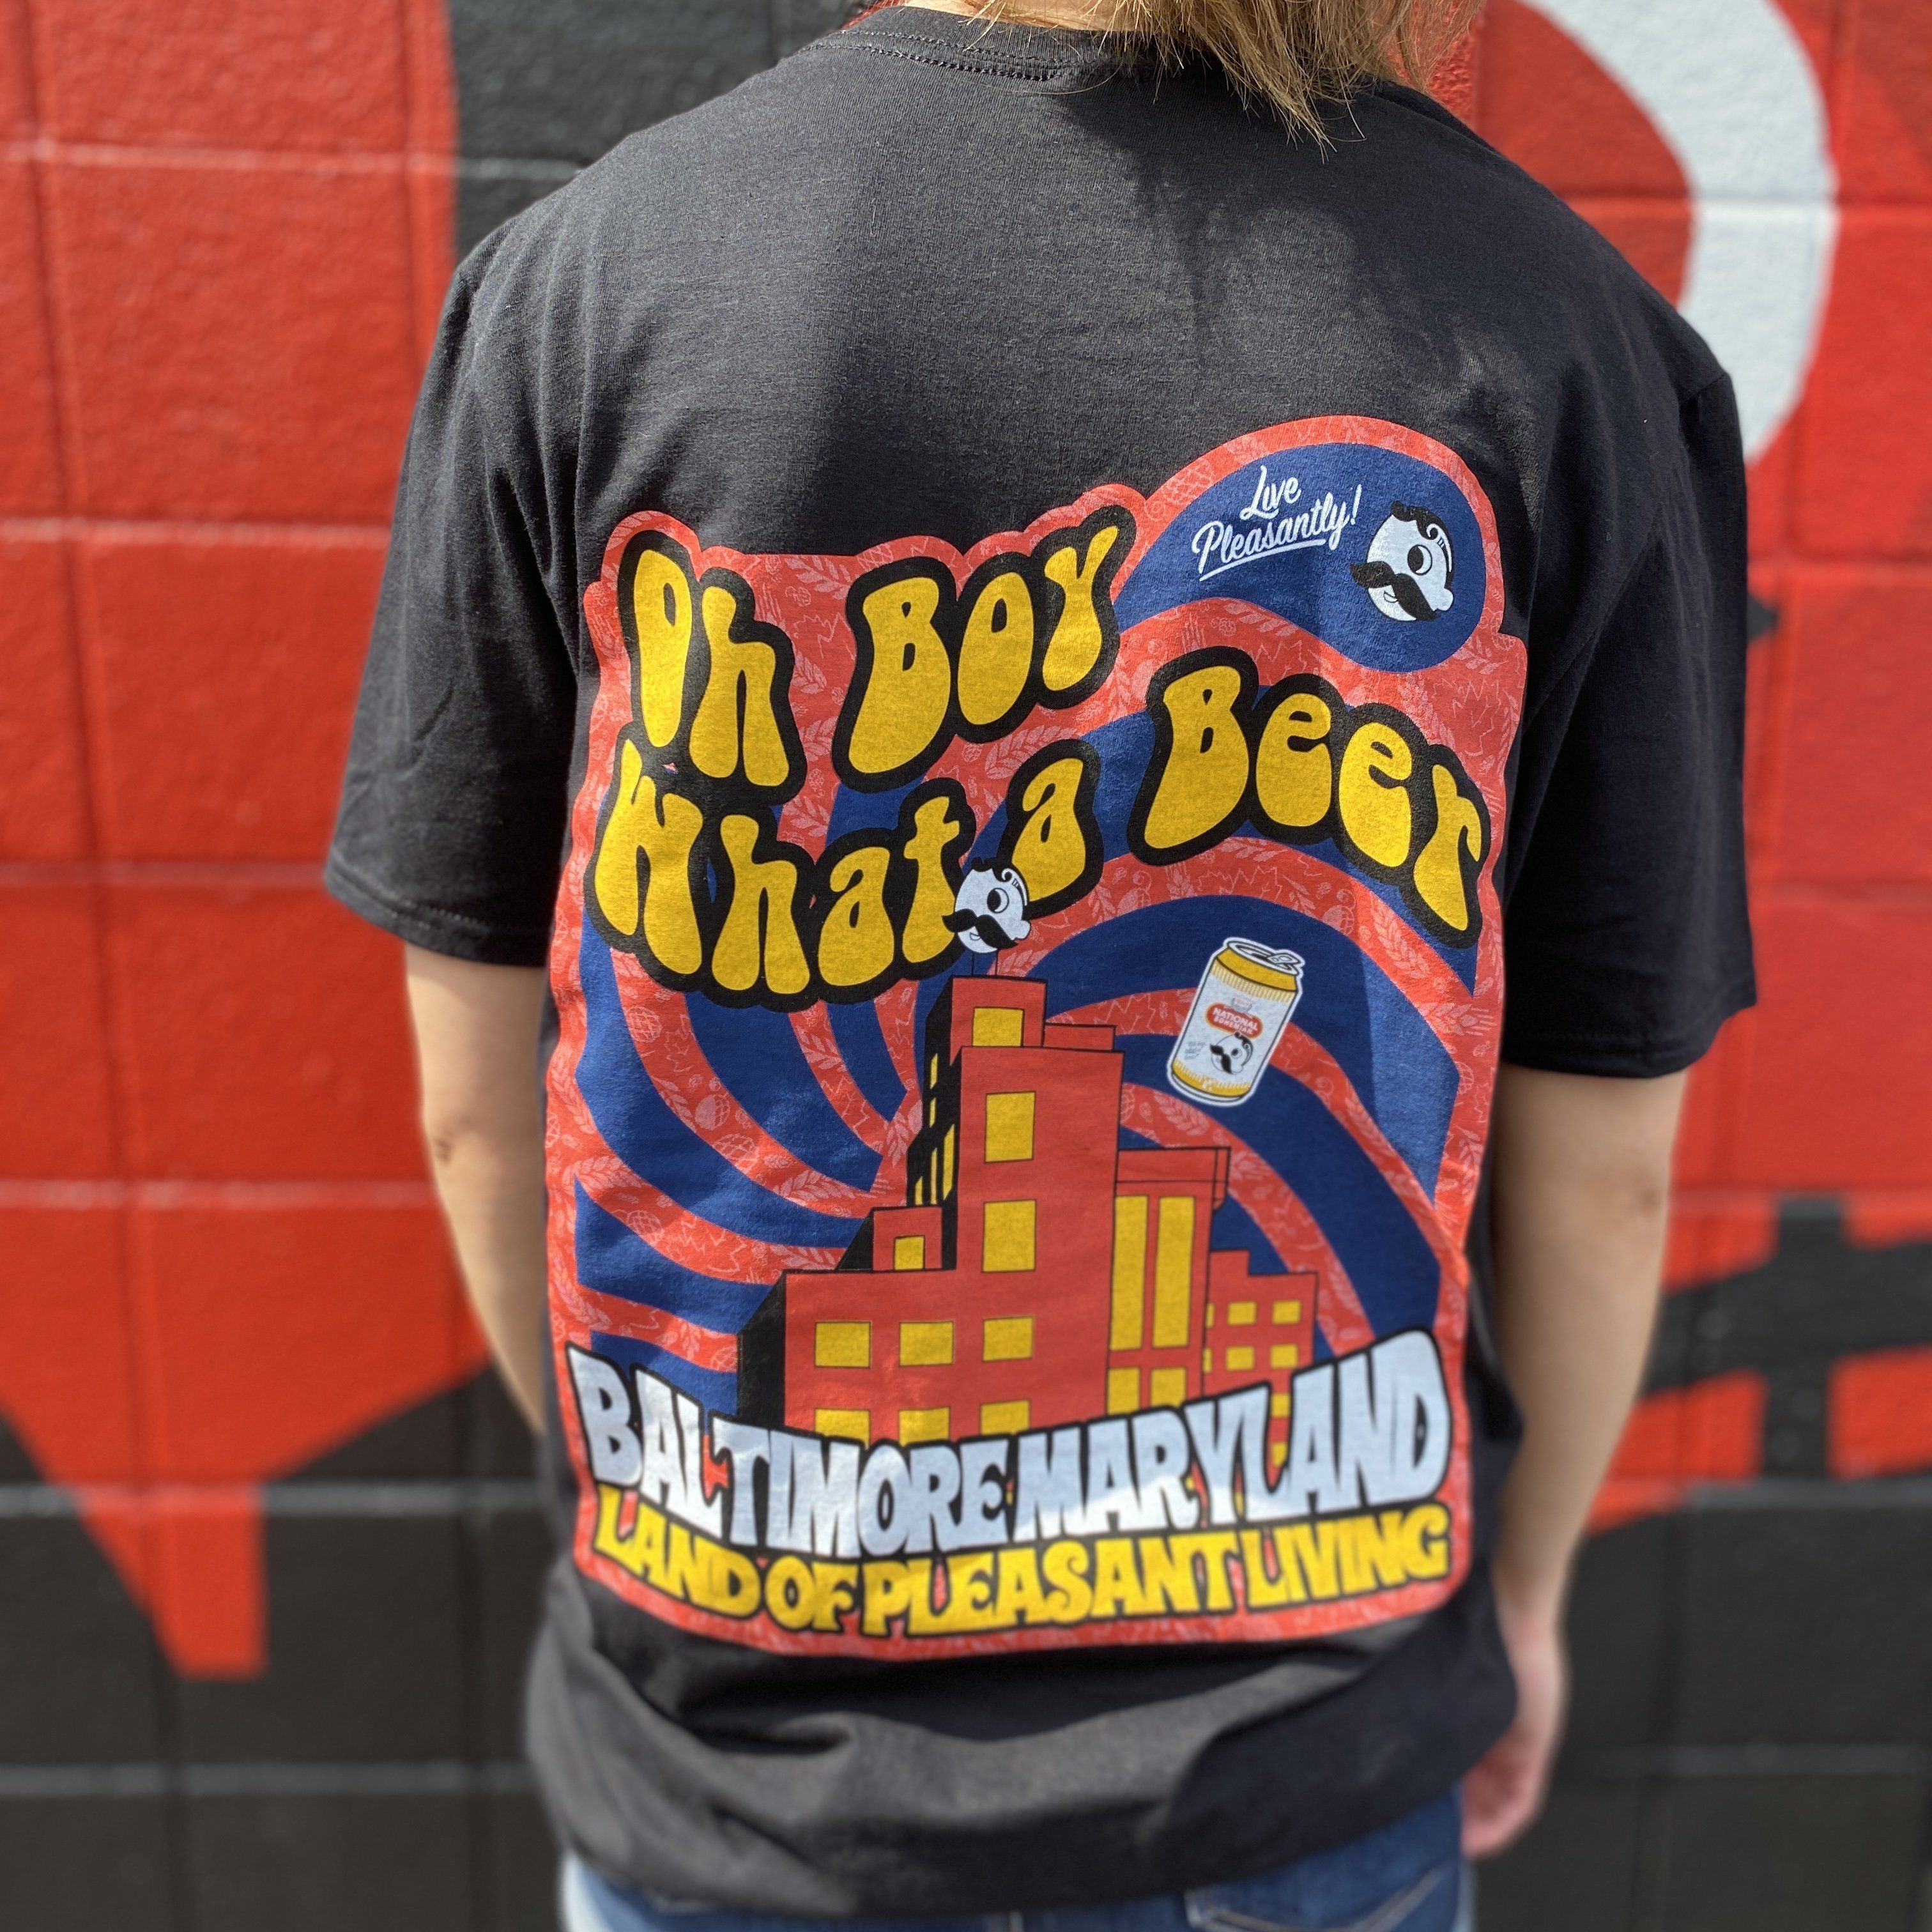 Oh Boy What a Beer - Land of Pleasant Living 70's Retro (Black) / Shirt - Route One Apparel